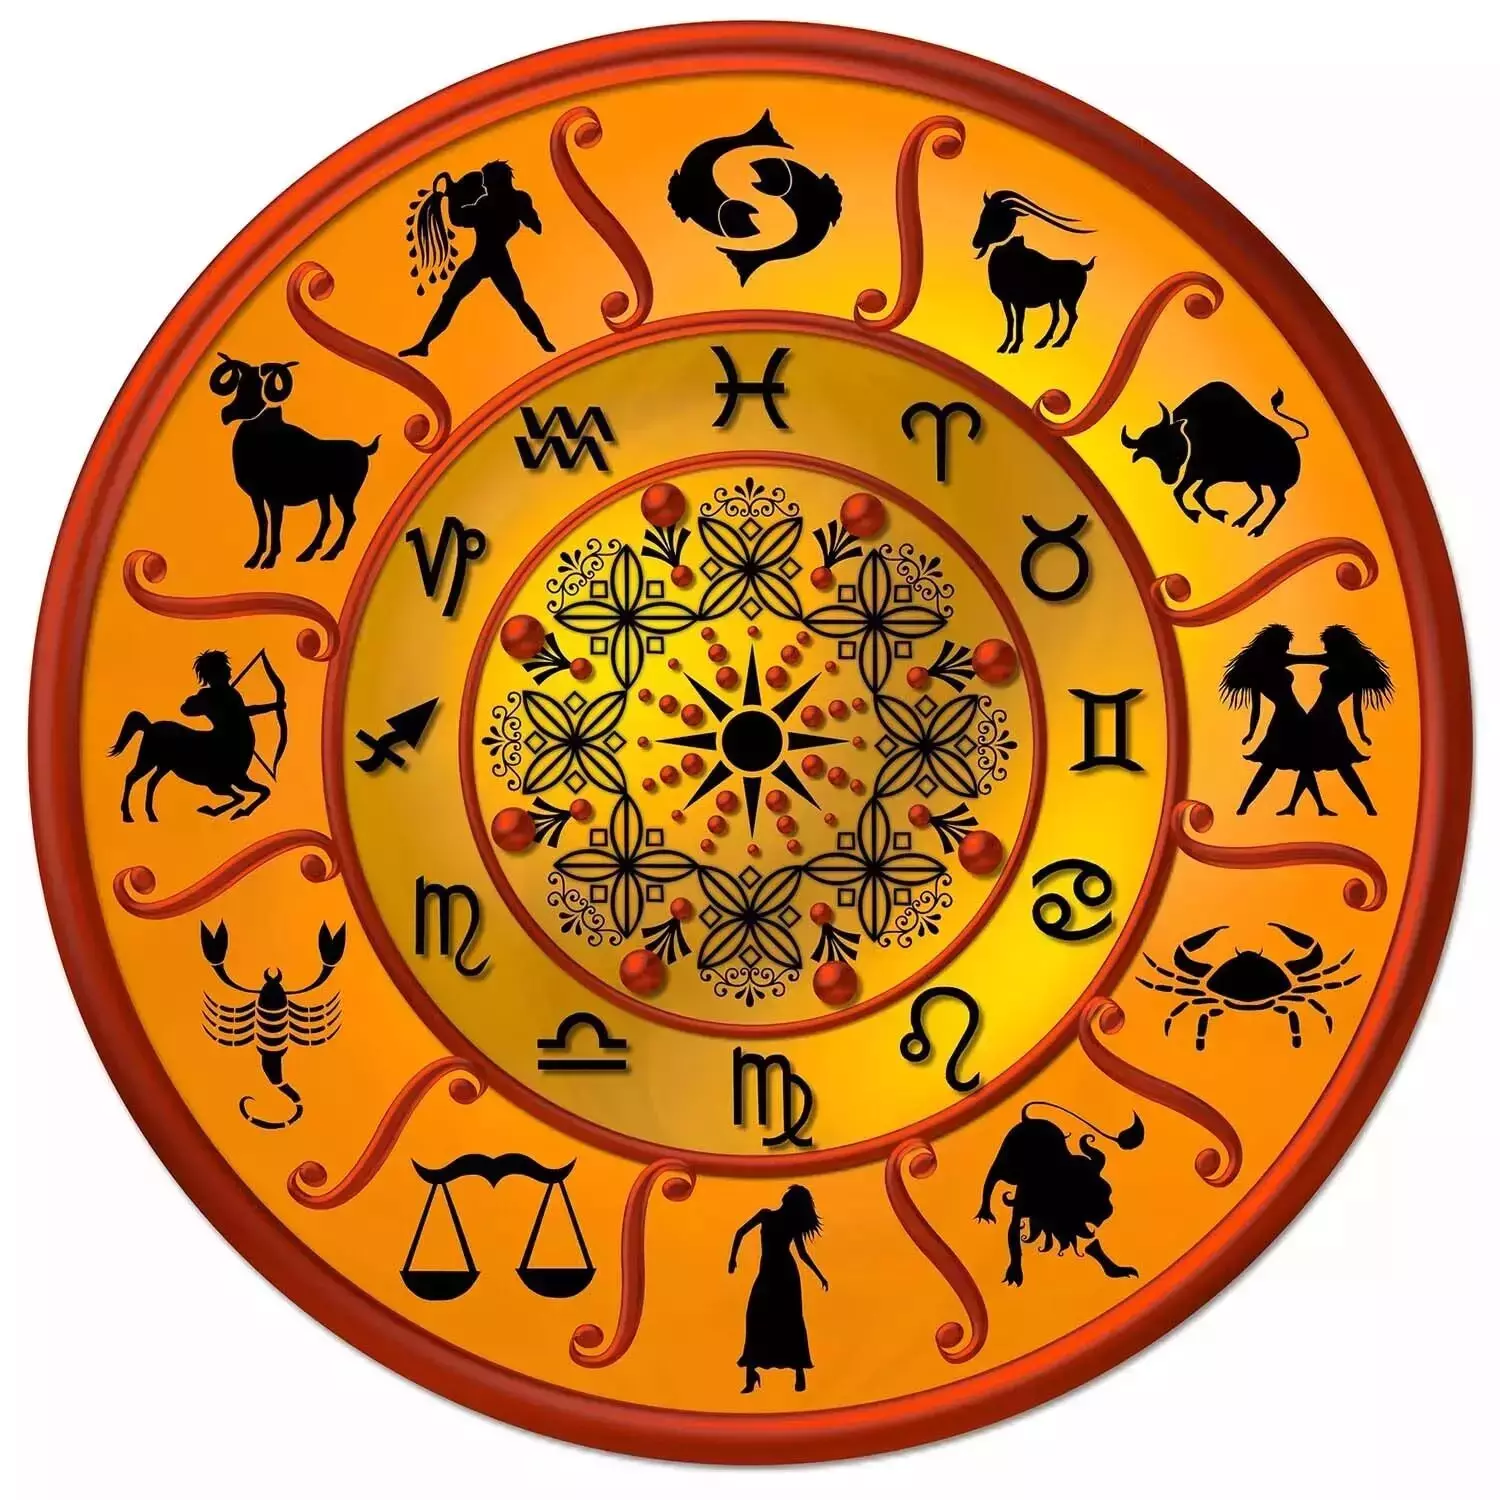 18 February – Know Your Todays Horoscope